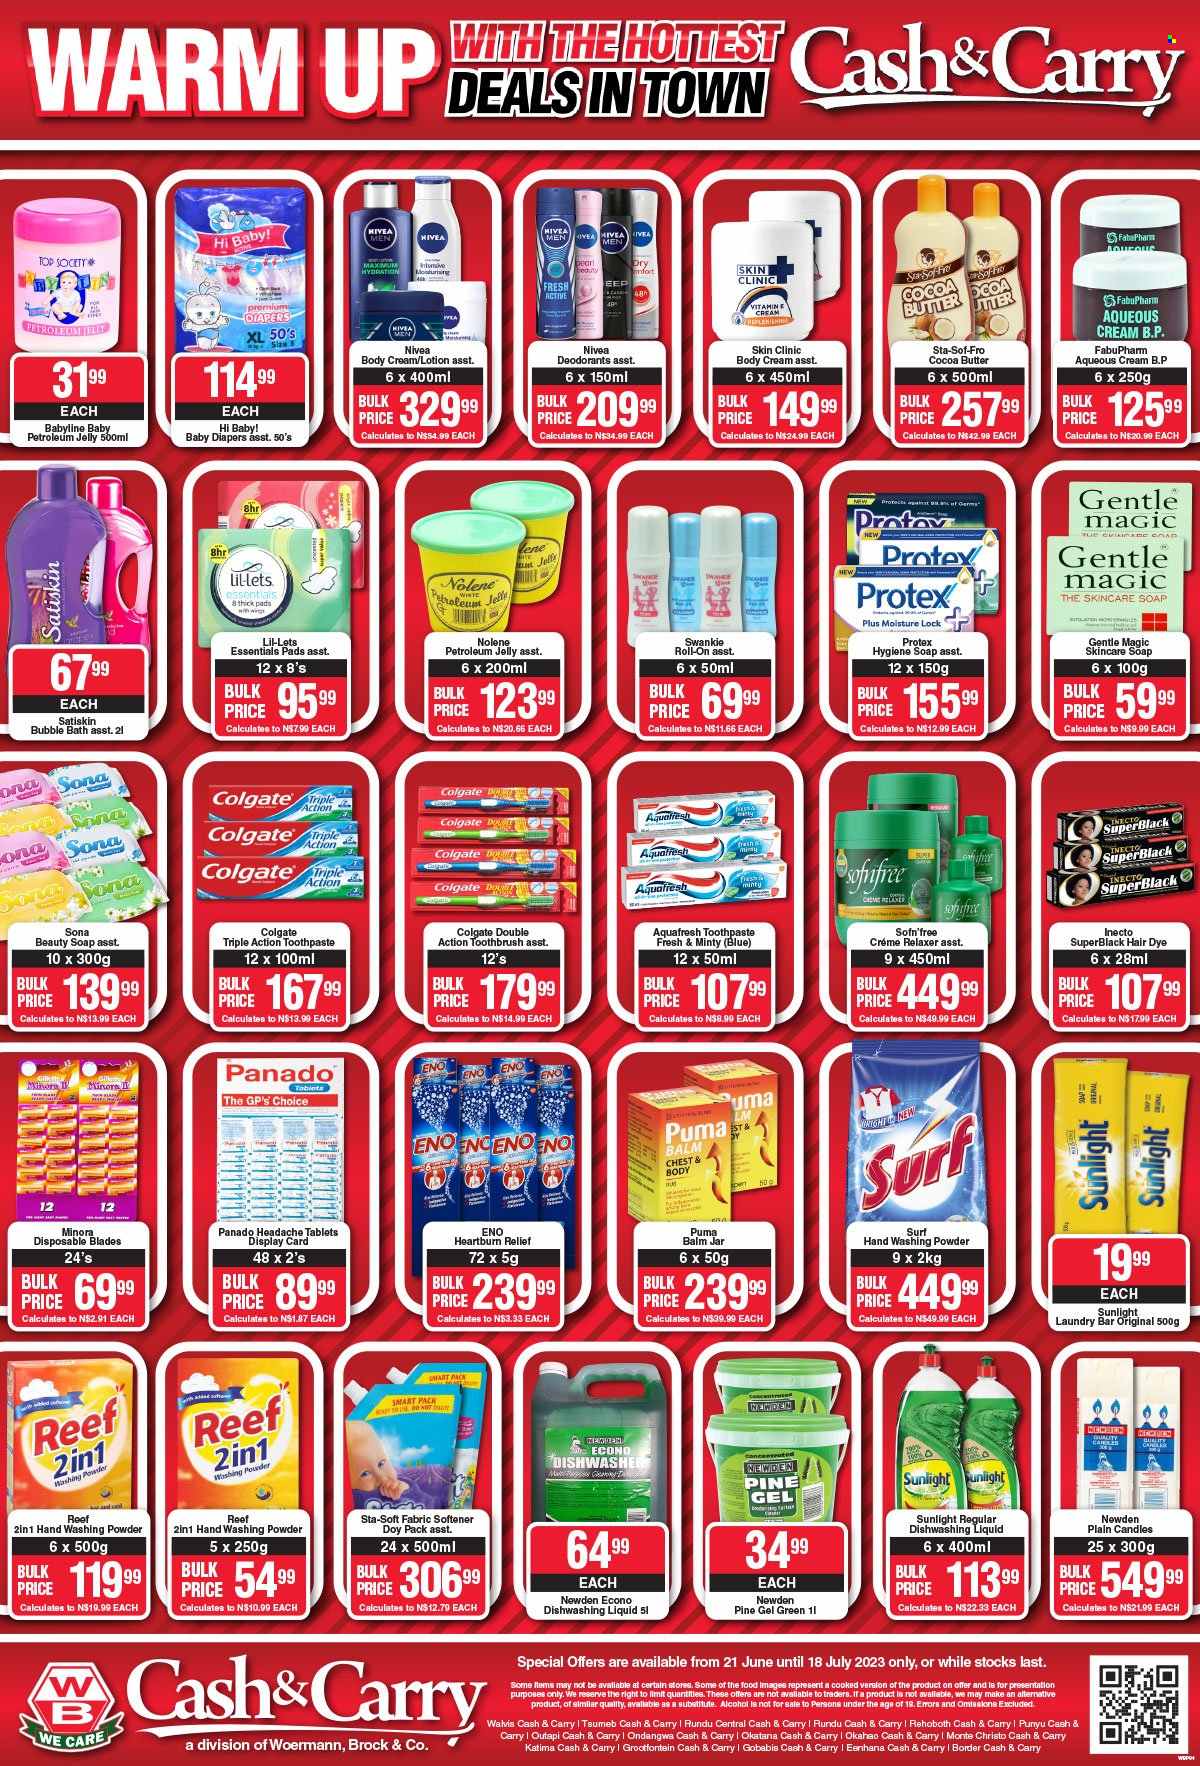 Woermann Brock catalogue  - 21/06/2023 - 18/07/2023 - Sales products - alcohol, nappies, fabric softener, laundry powder, laundry soap bar, Sunlight, Surf, dishwashing liquid, bubble bath, Nivea, Protex, Satiskin, Nivea Men, Colgate, toothbrush, toothpaste, Lil-lets, petroleum jelly, Gentle Magic, relaxer, Top Society, roll-on, deodorant, Swankie. Page 6.